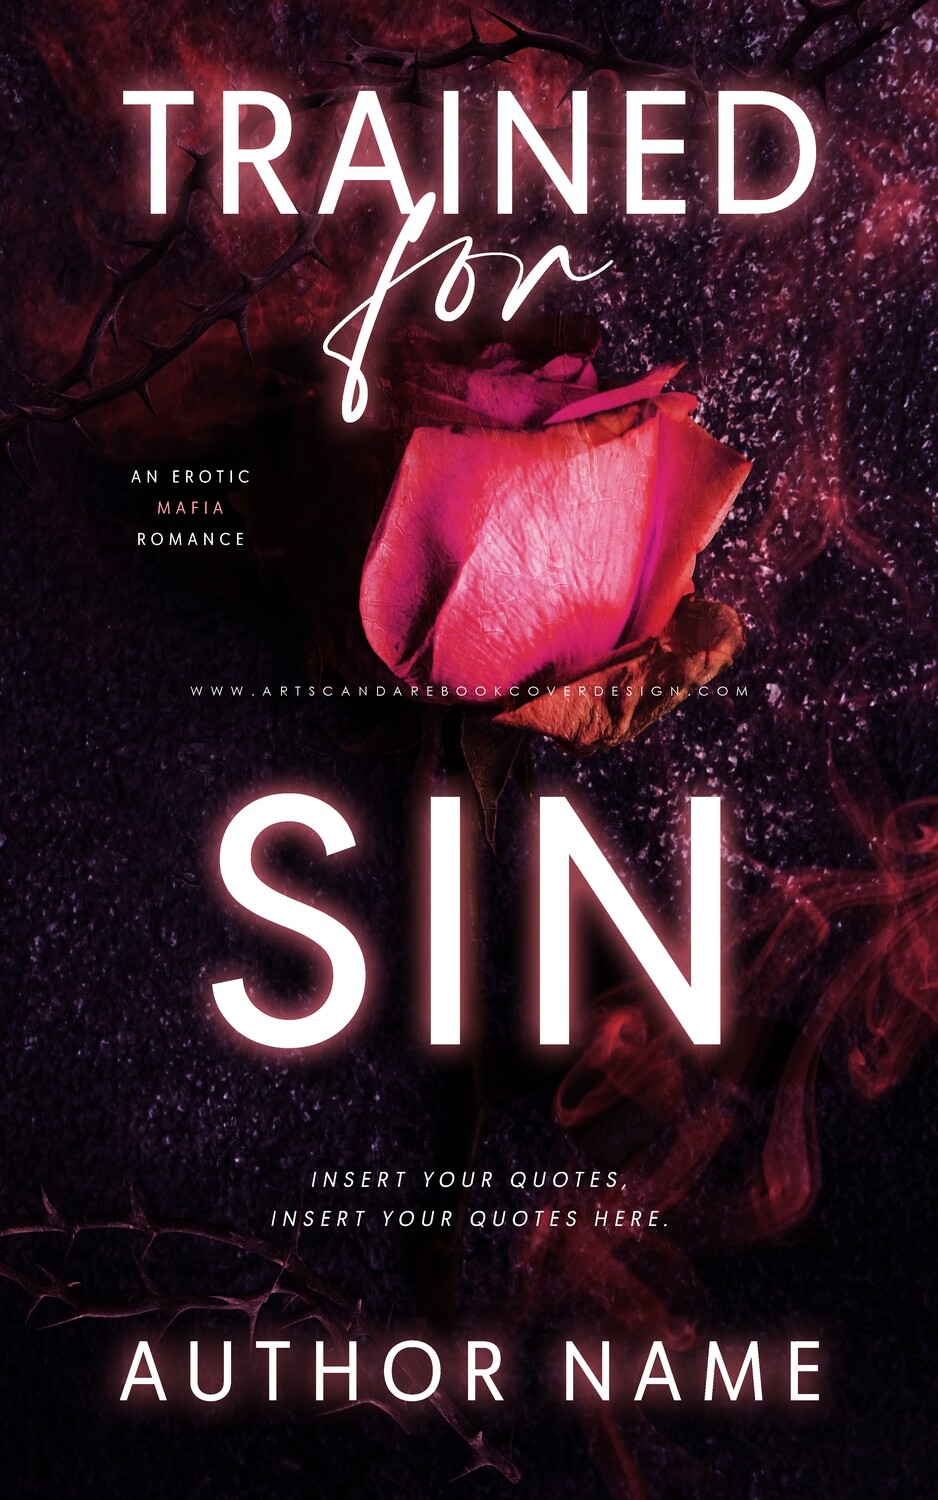 Ebook: Trained for Sin